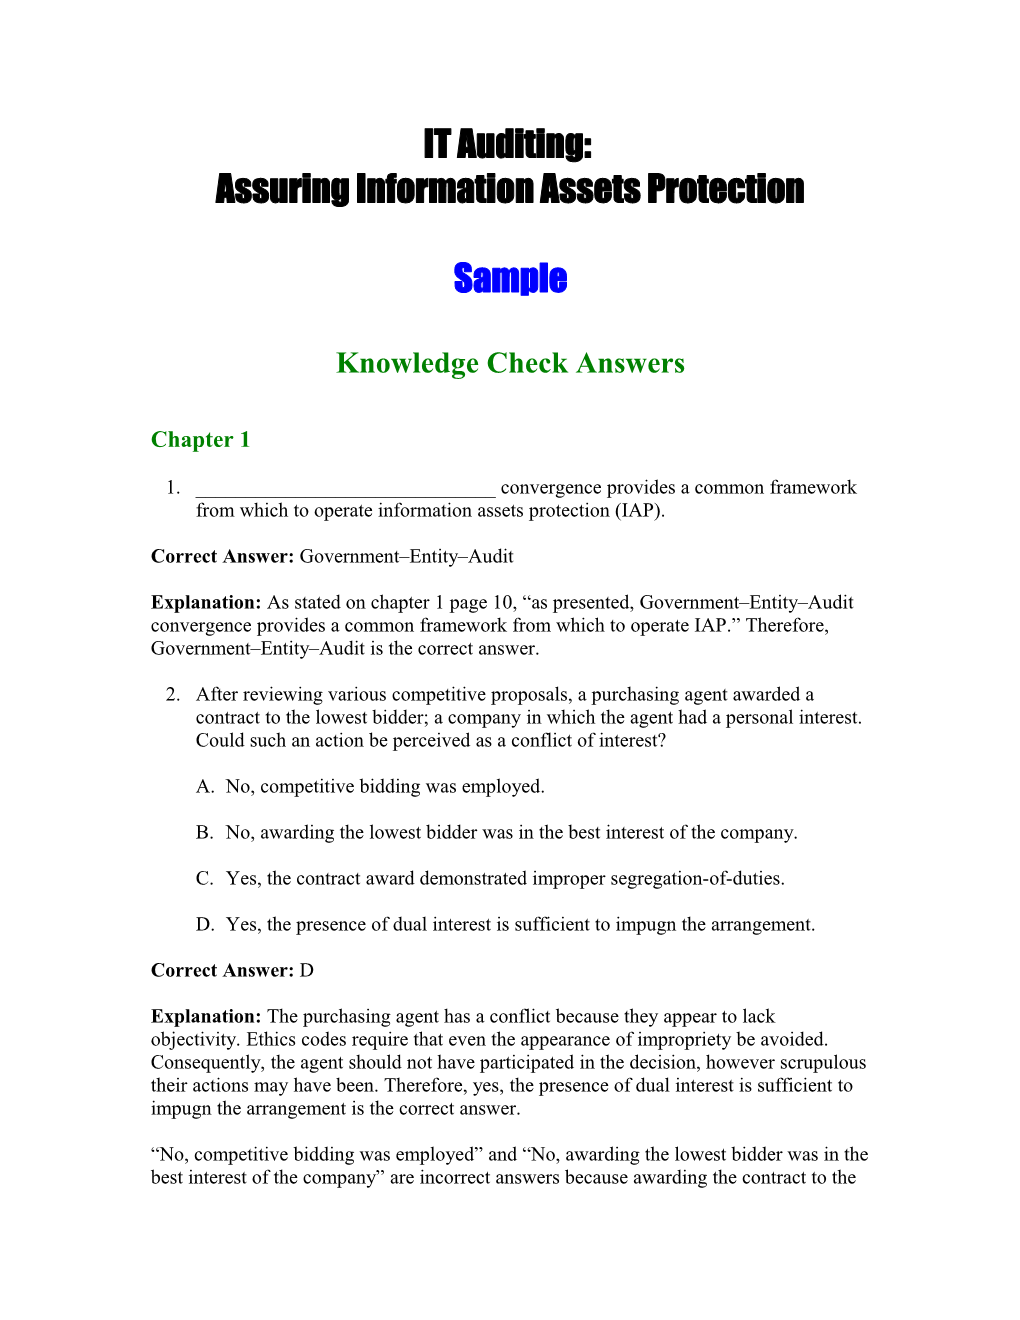 Knowledge Check Questions - IAP